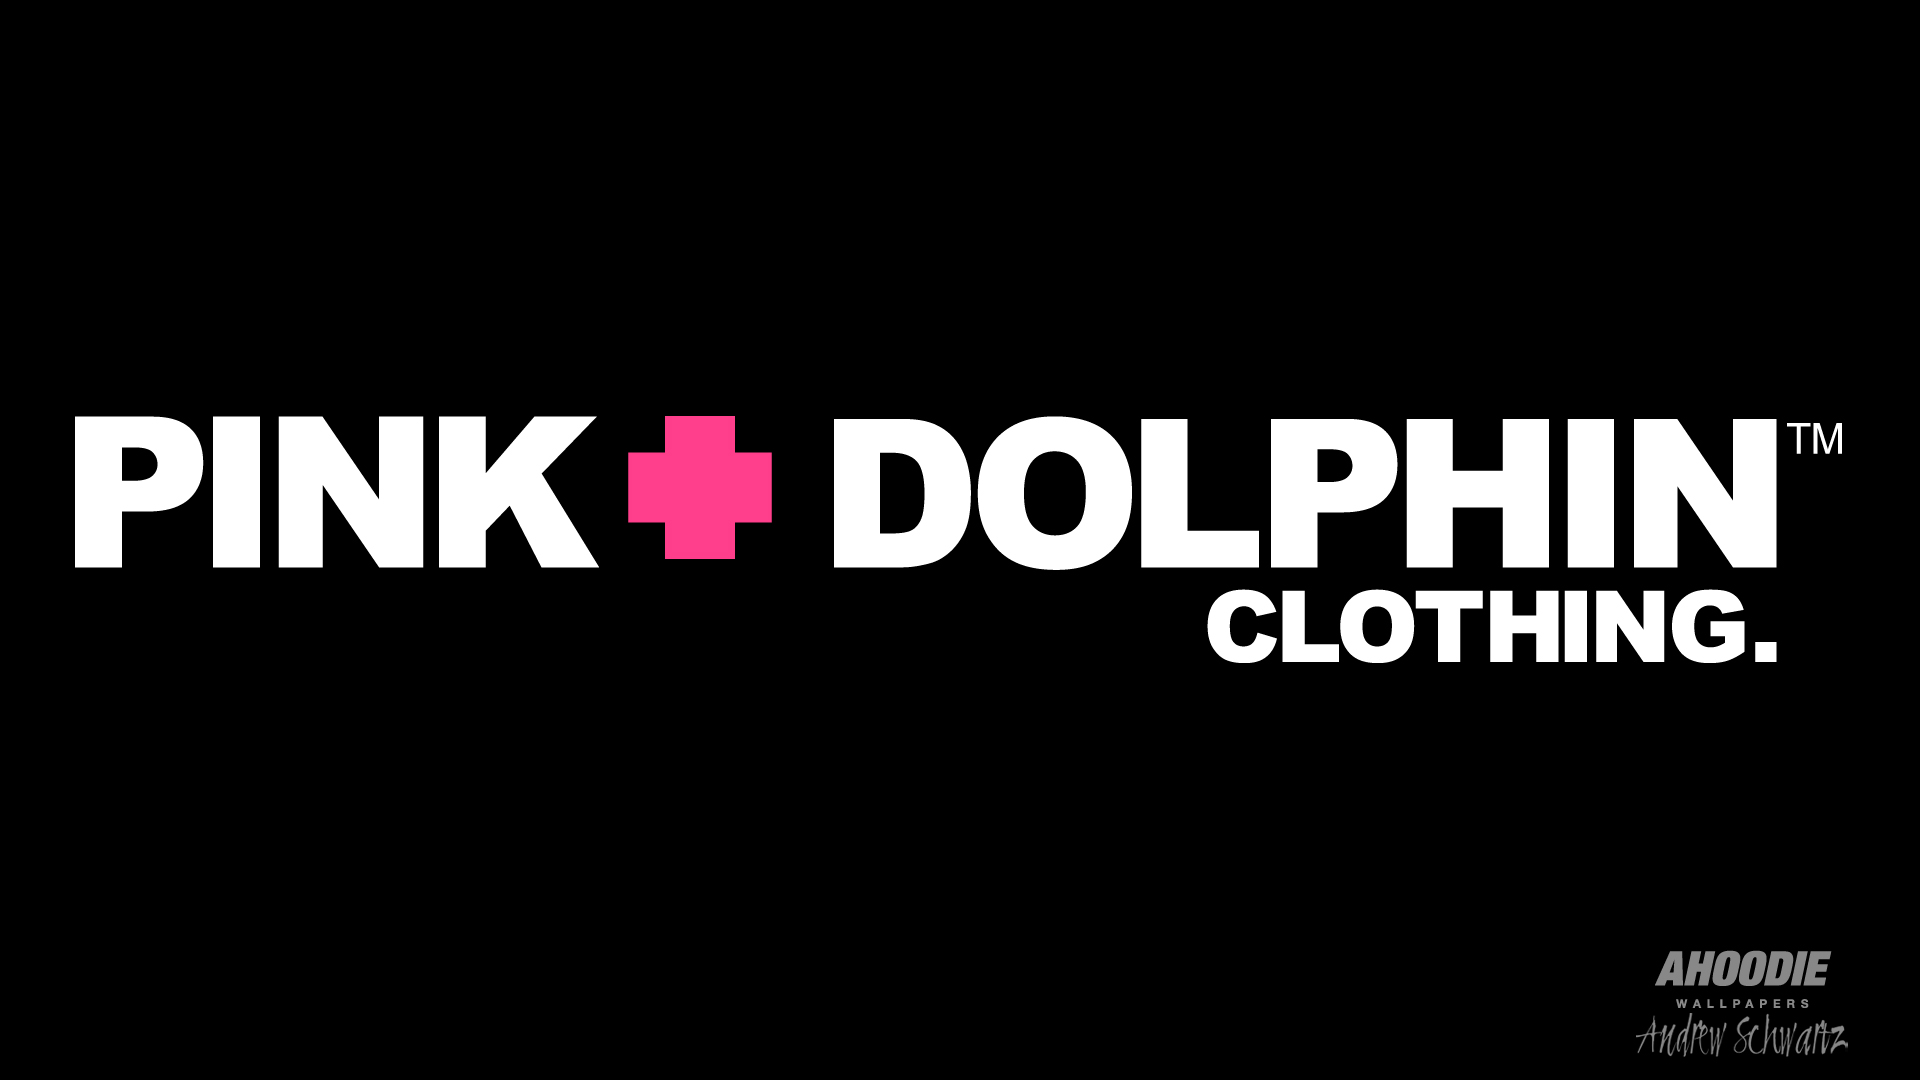 Pink Dolphin Clothing wallpaper   610504 1920x1080